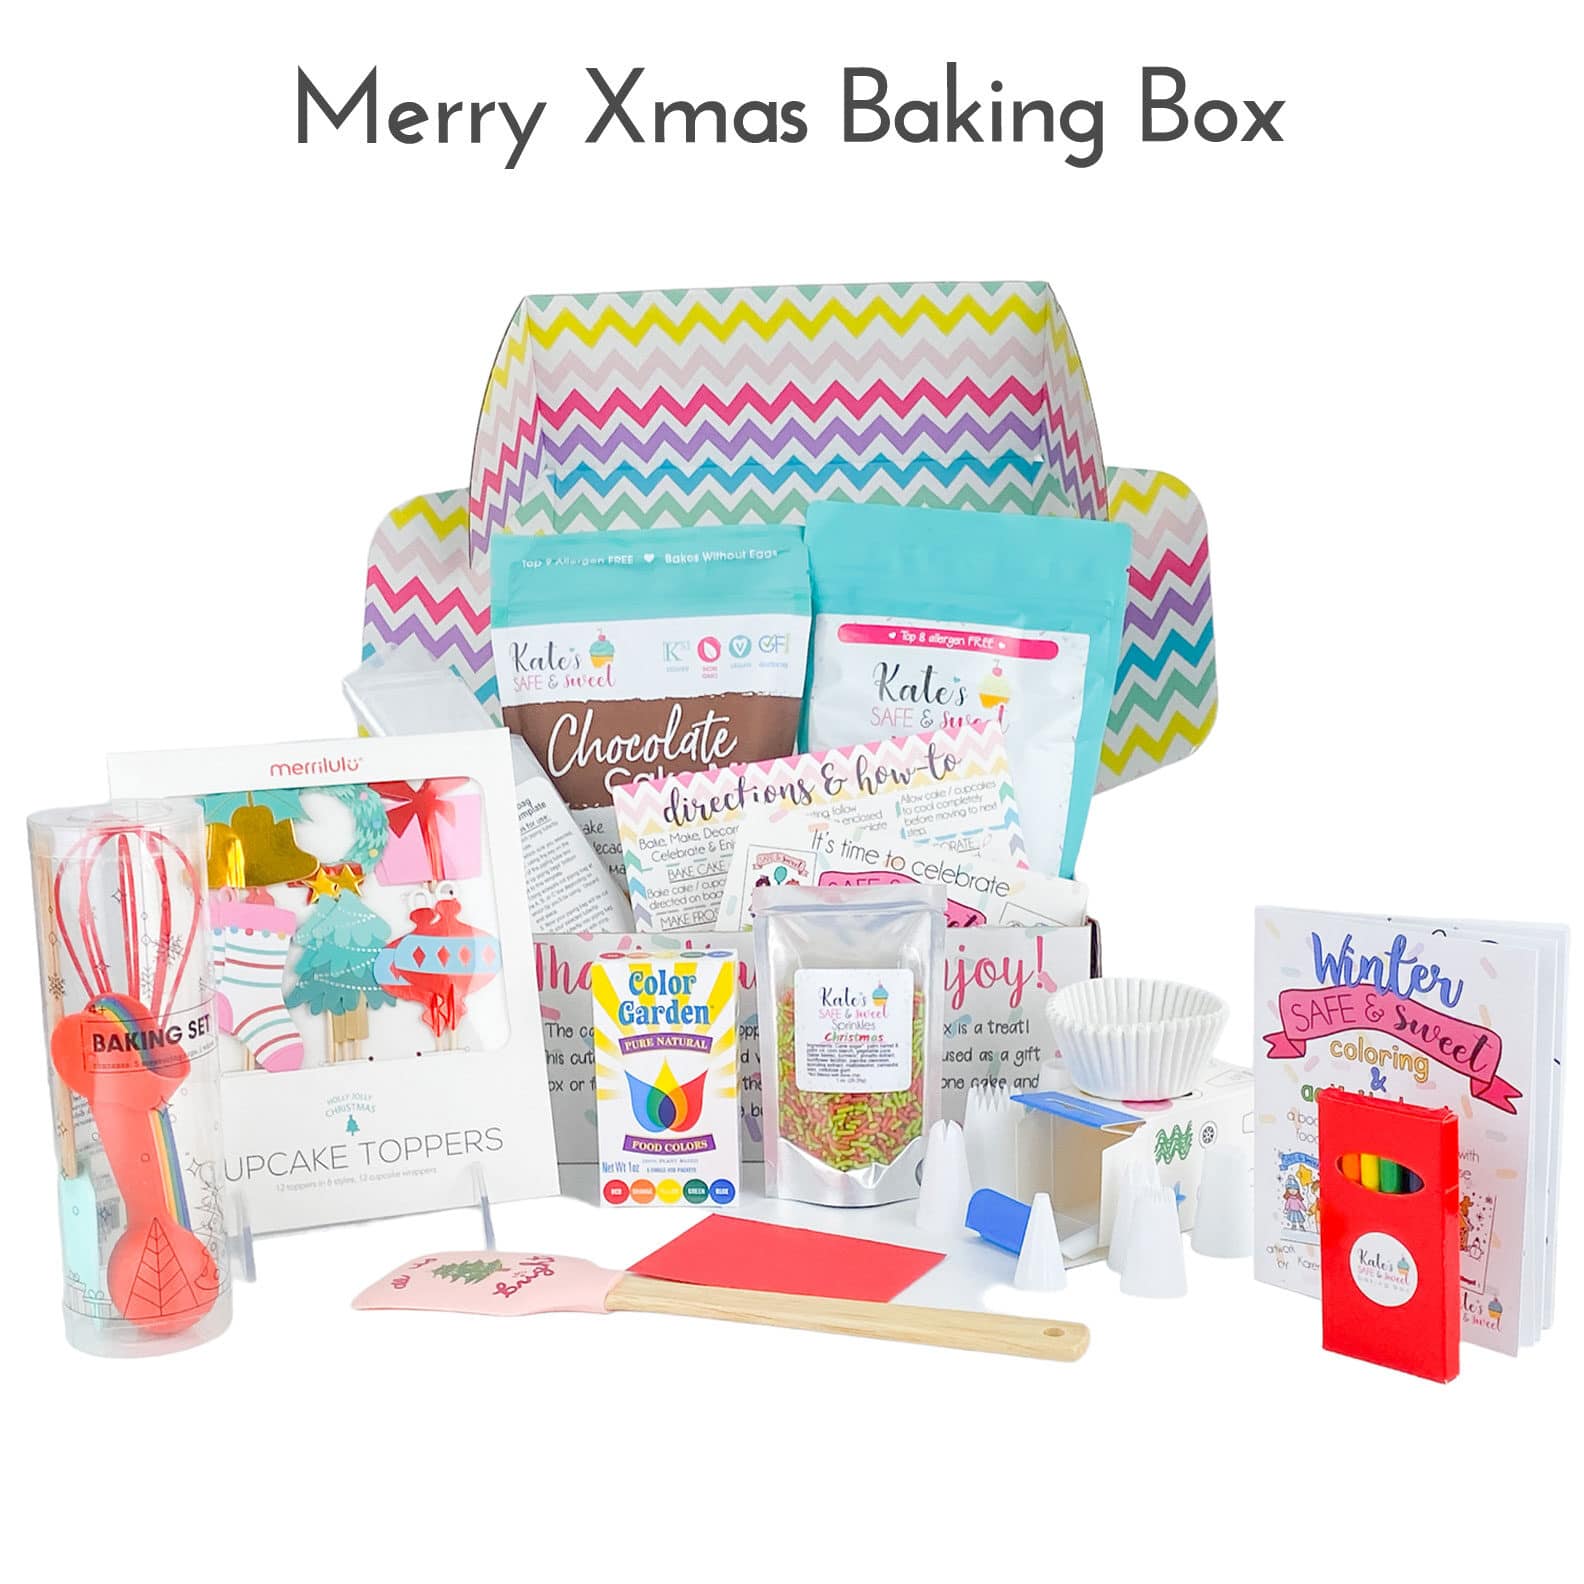 Kate's-Safe-and-Sweet---Merry-Xmas-Baking-Box